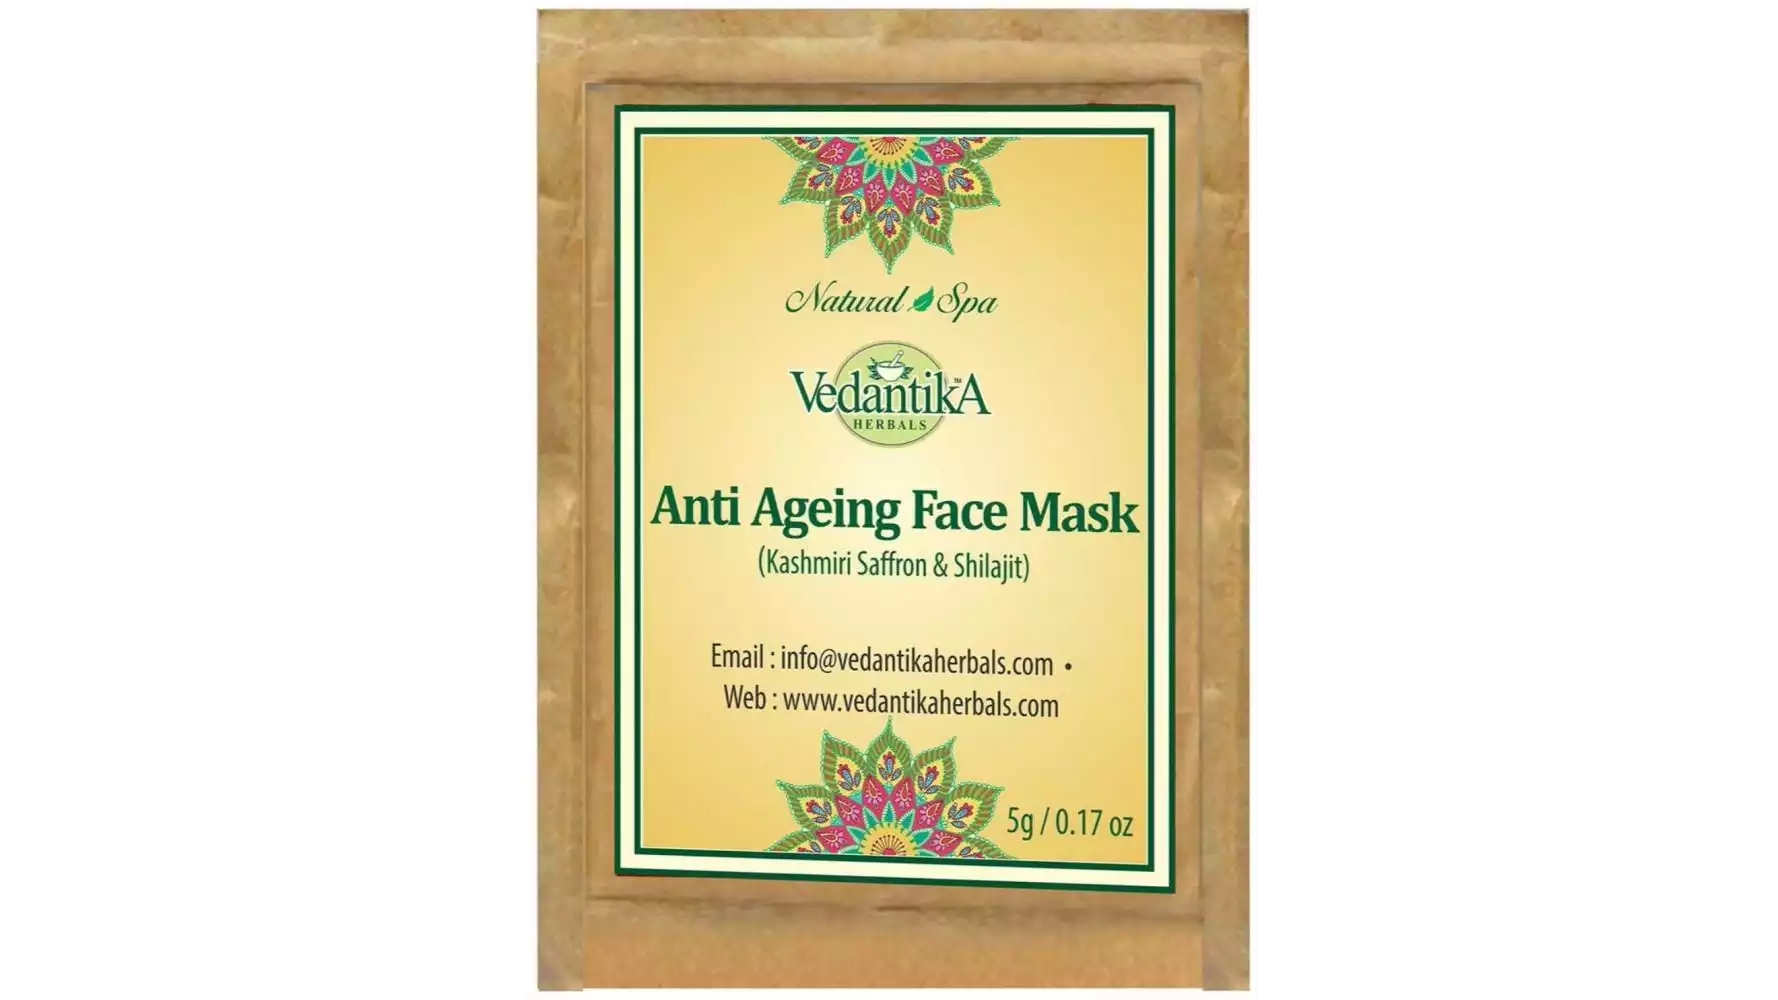 Vedantika Herbals Anti Ageing Face Mask with Saffron & Shilajit Trial Pack (5g)